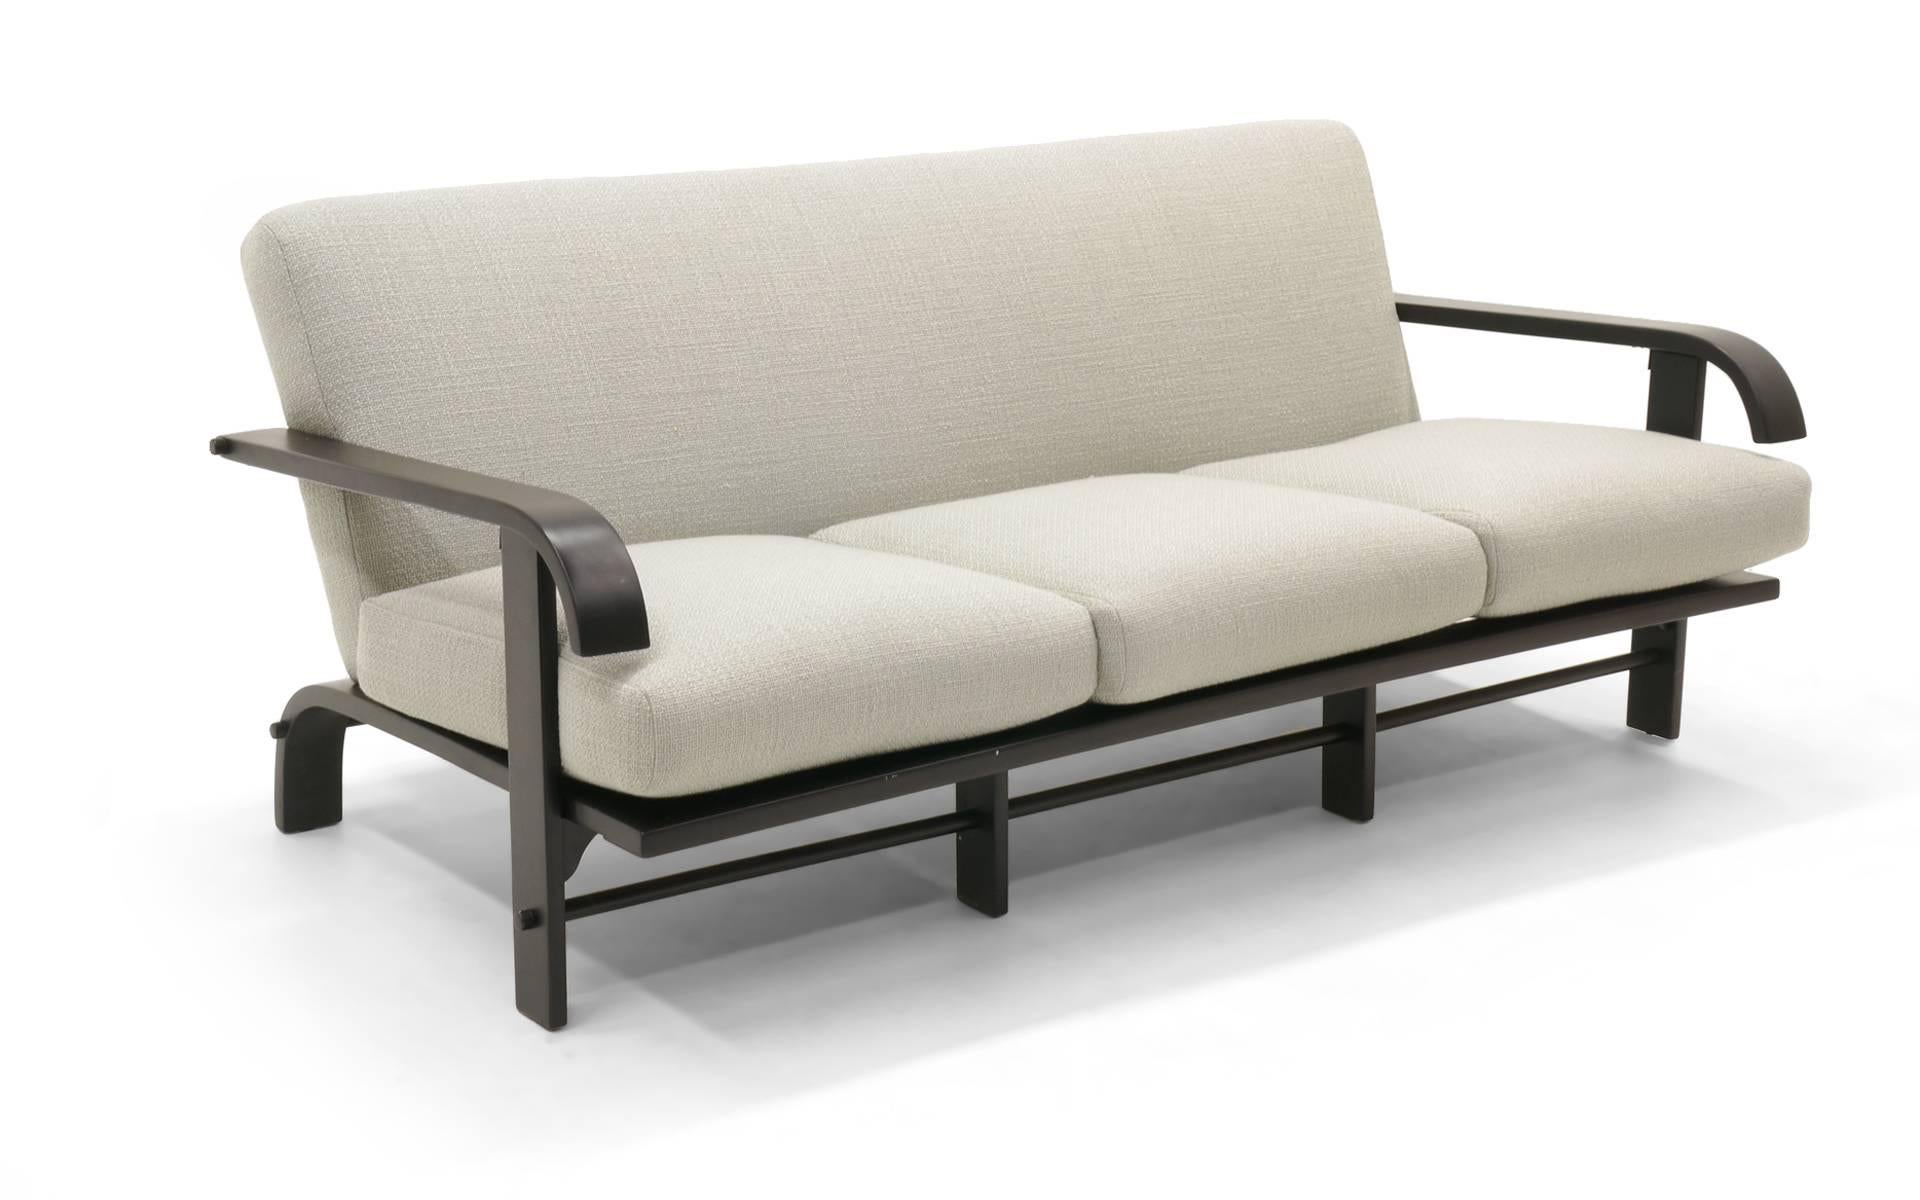 Russel Wright for Conant Ball sofa. Black lacquered wood frame and newly upholstered in a beautiful light grey or sliver fabric.